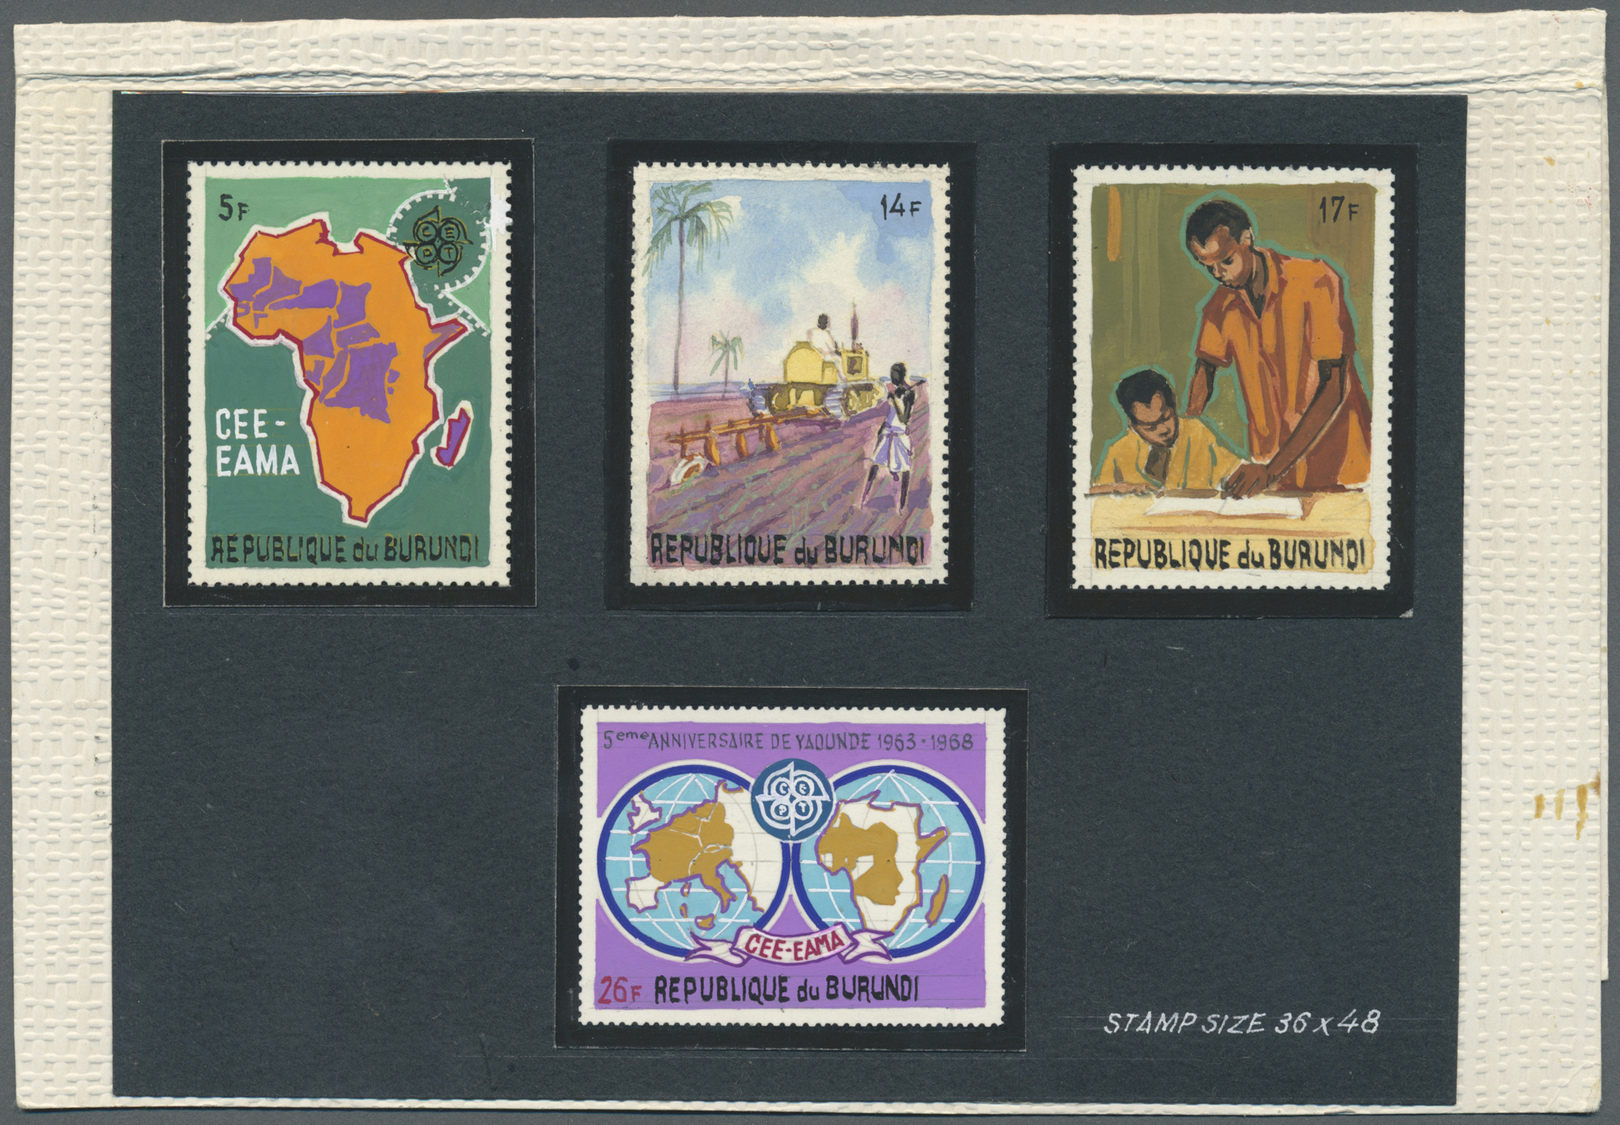 Burundi: 1969. 5th Anniversary Of The European And African-Malgache Economic Community. 4 Artist's Stamp-sized Drawings - Unused Stamps